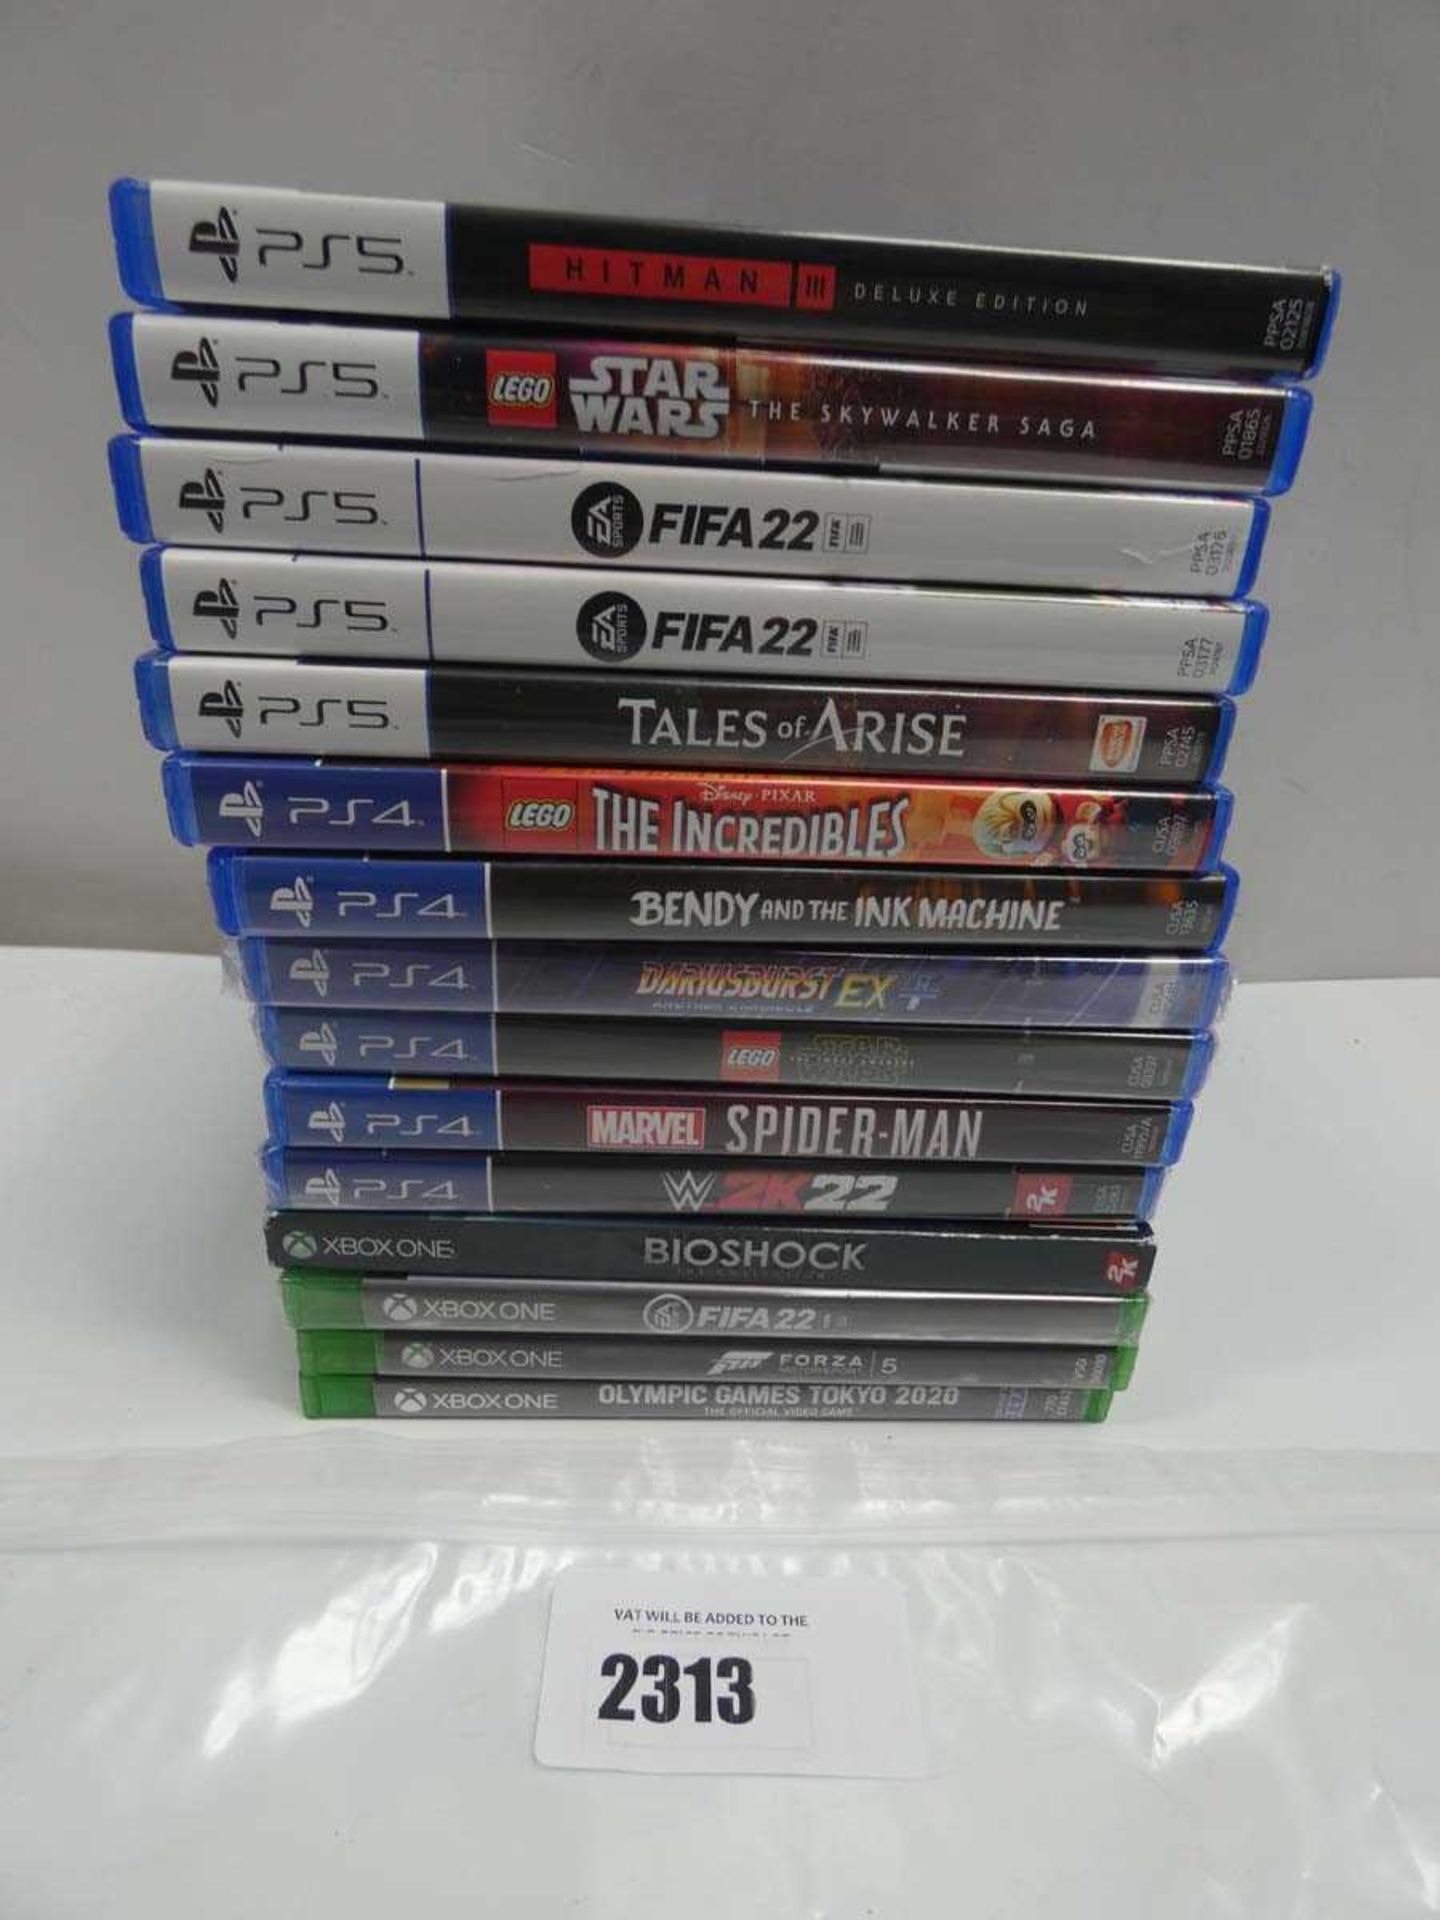 +VAT 5x PS5 games, 6x PS4 games and 4x Xbox One games